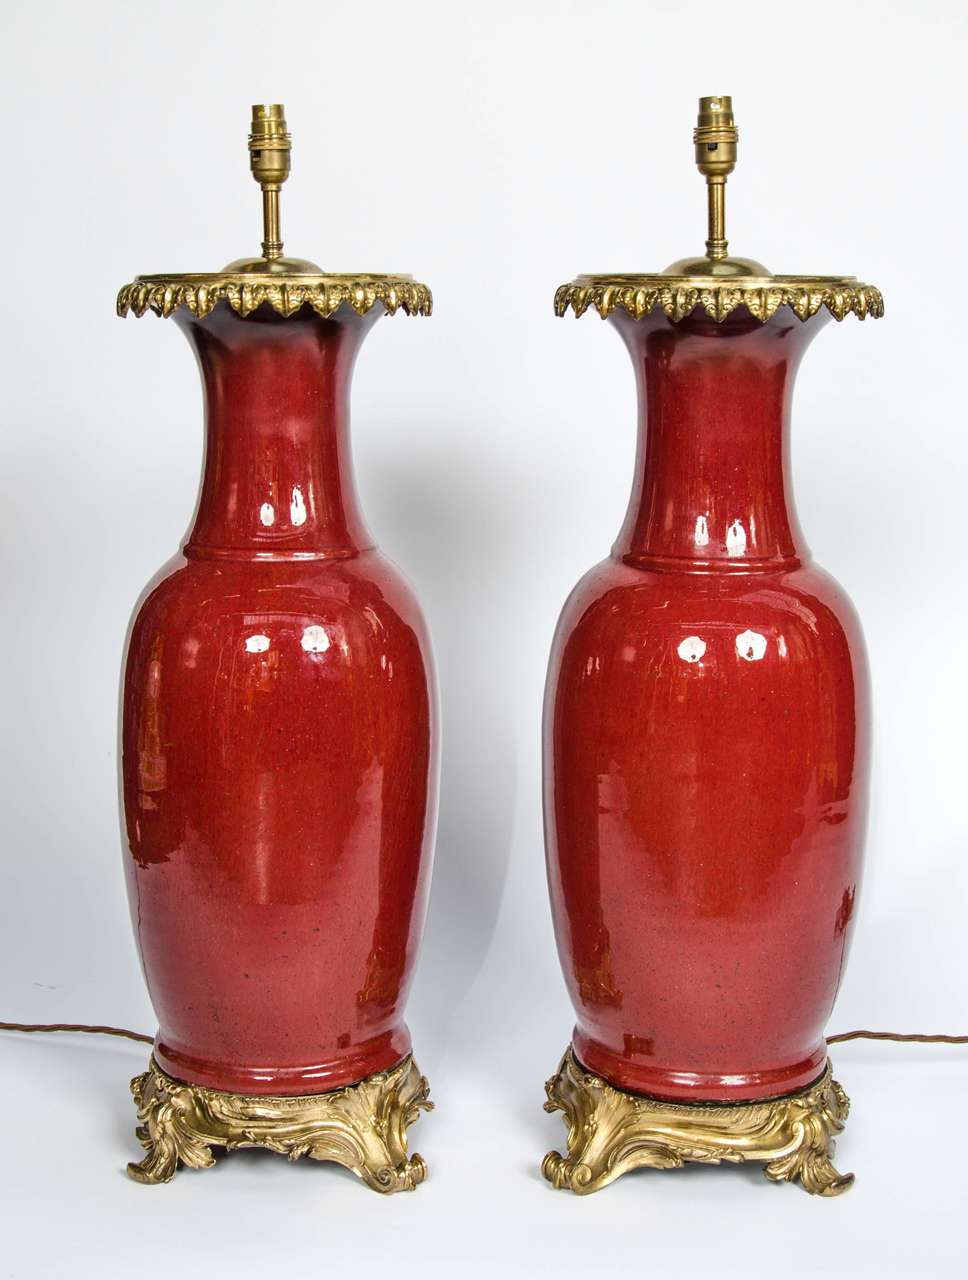 An impressive pair of 19th Century Chinese Sang De Boeuf vases with French Rococo style ormolu mounts, converted to lamps.